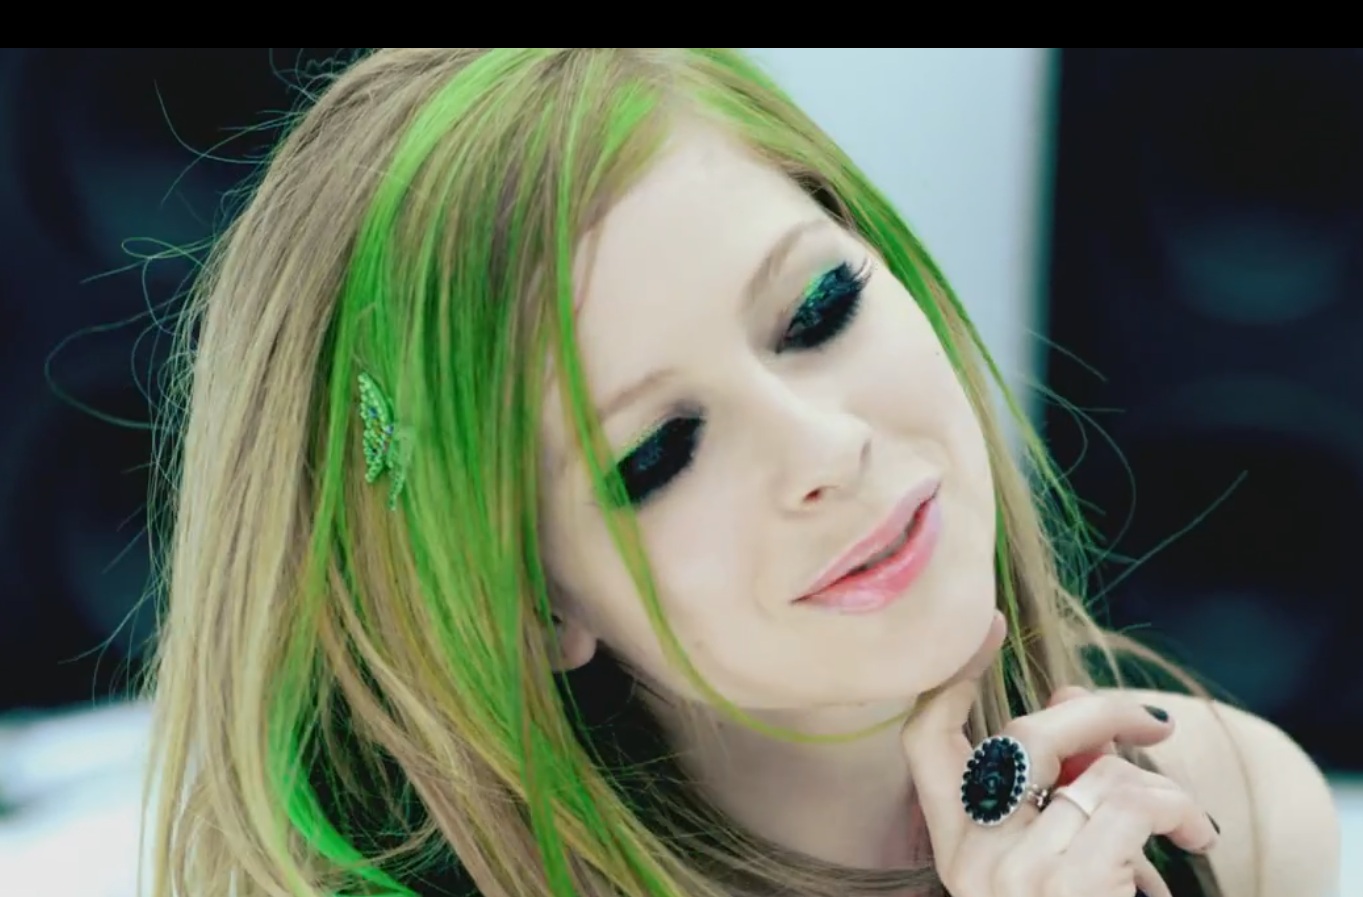 Eotdavril lavigne smile music video inspired makeup â babble queen diaries